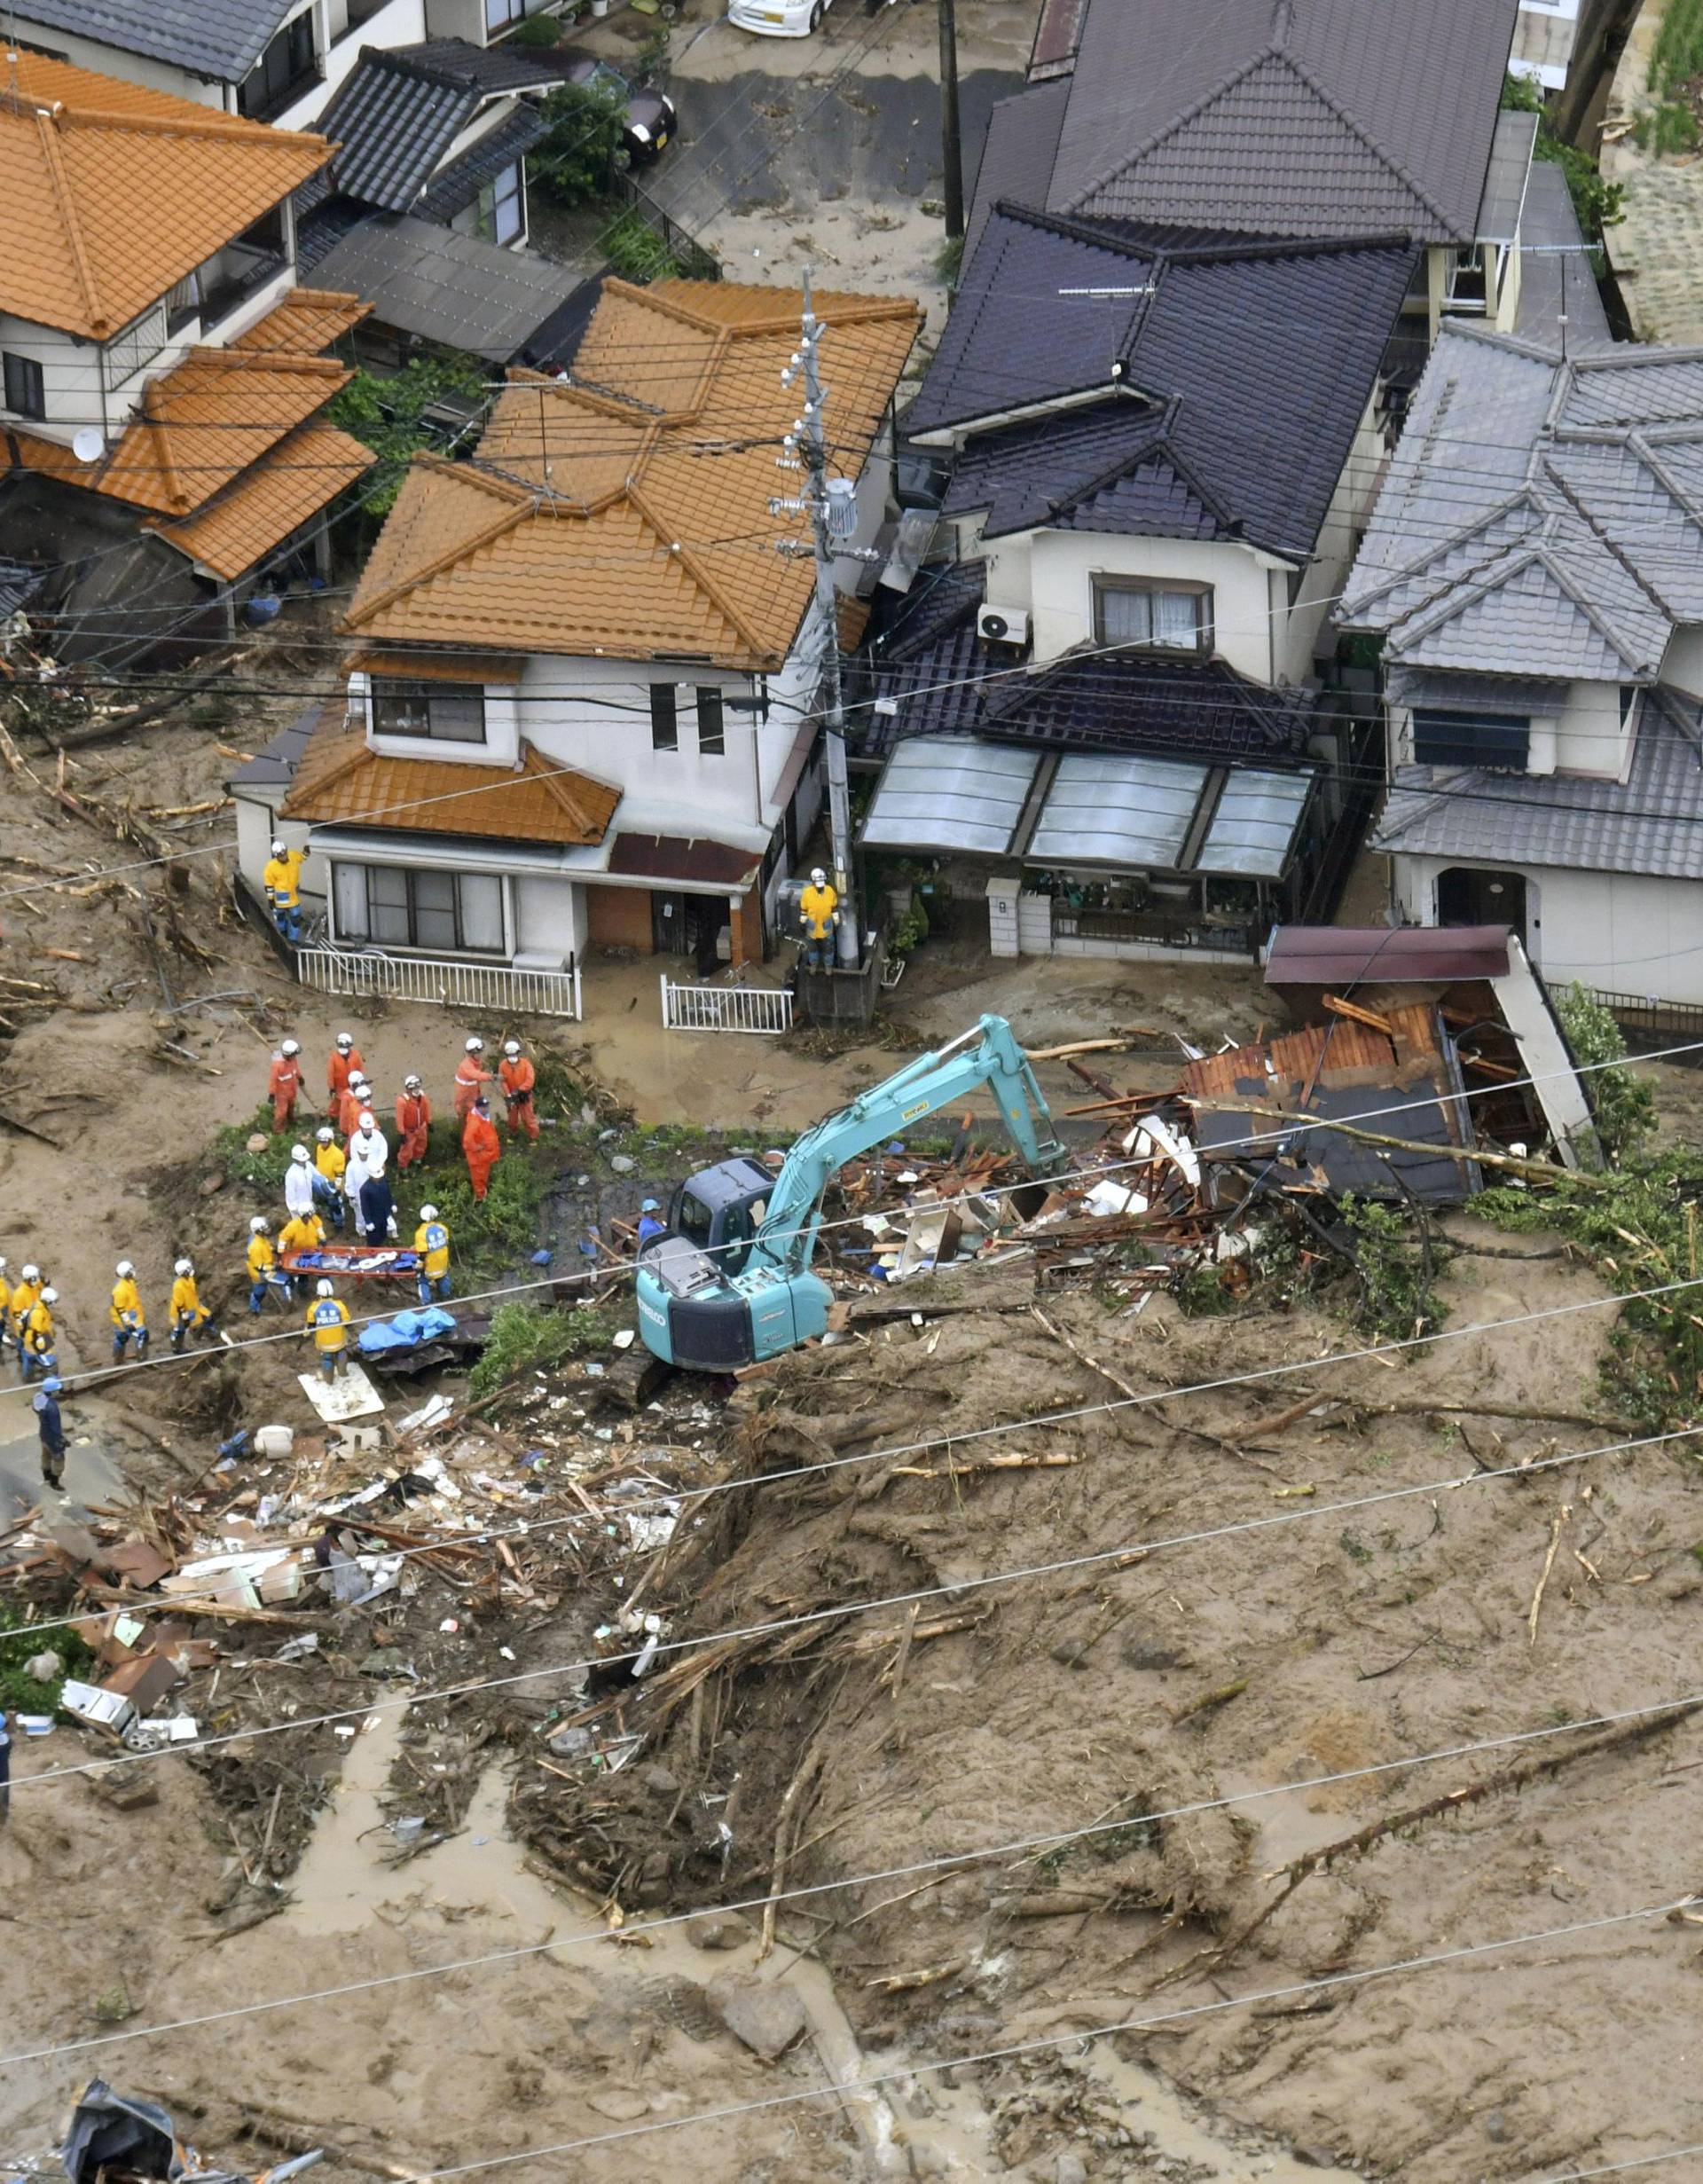 Rescue workers are seen next to houses damaged by a landslide following heavy rain in Hiroshima